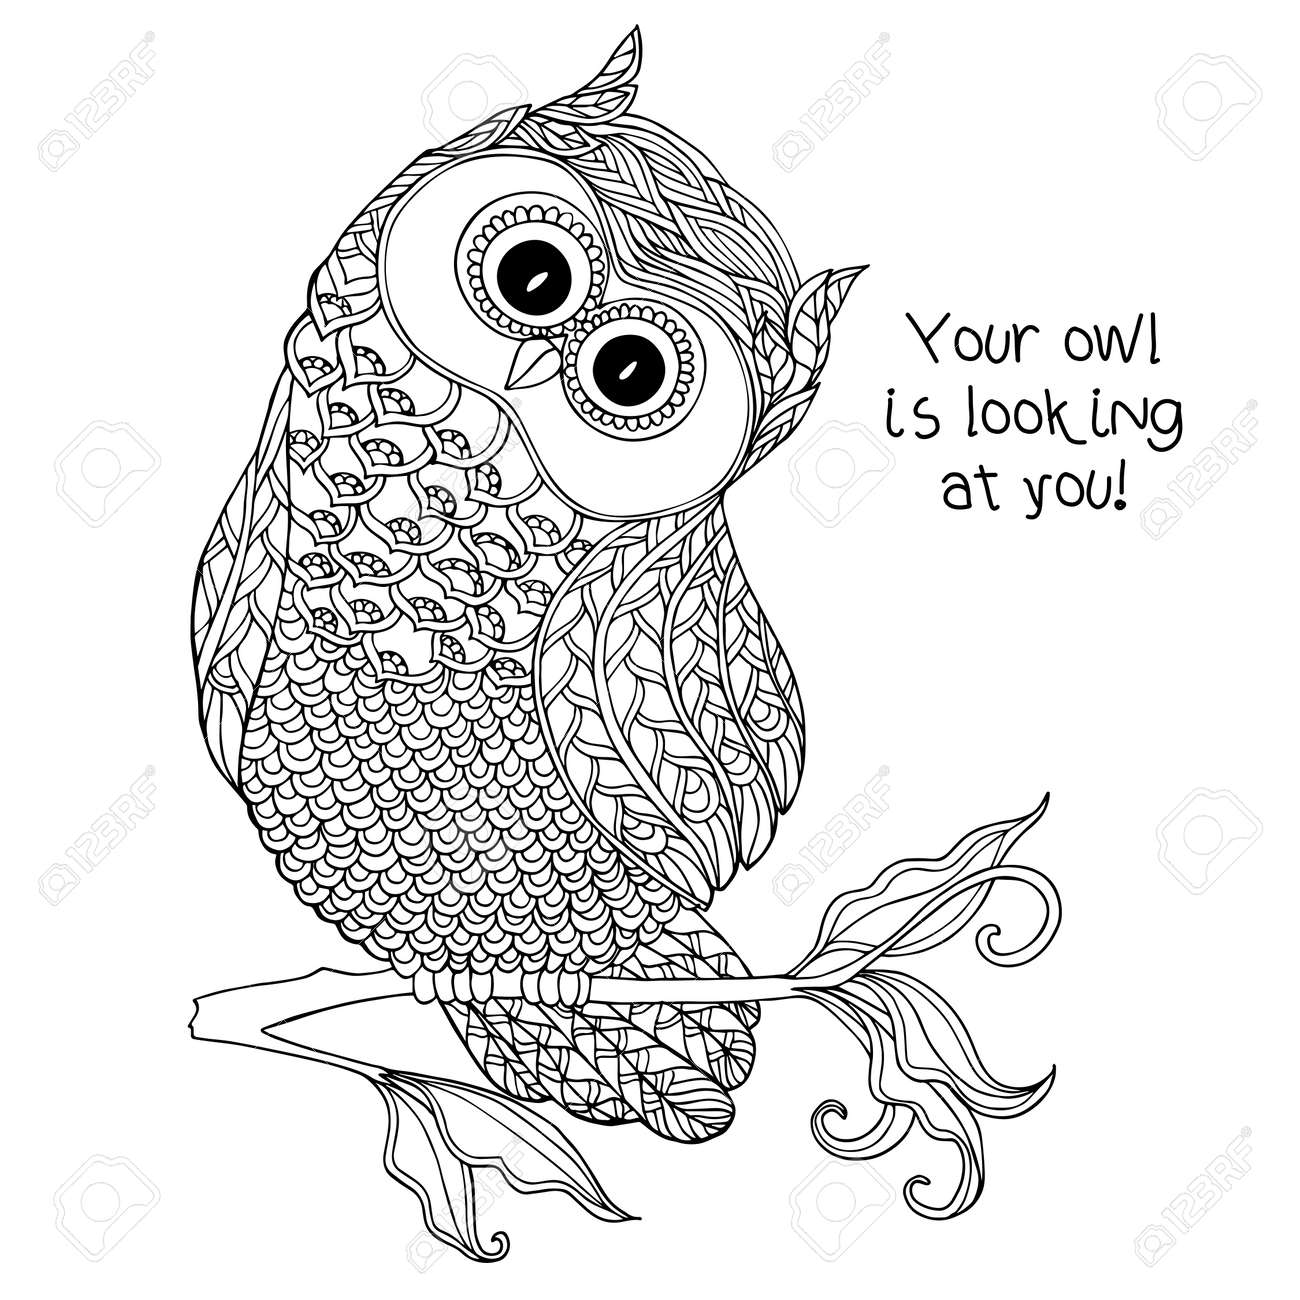 Coloring book for adult and older children coloring page with cute owl outline drawing in zentangle style royalty free svg cliparts vectors and stock illustration image